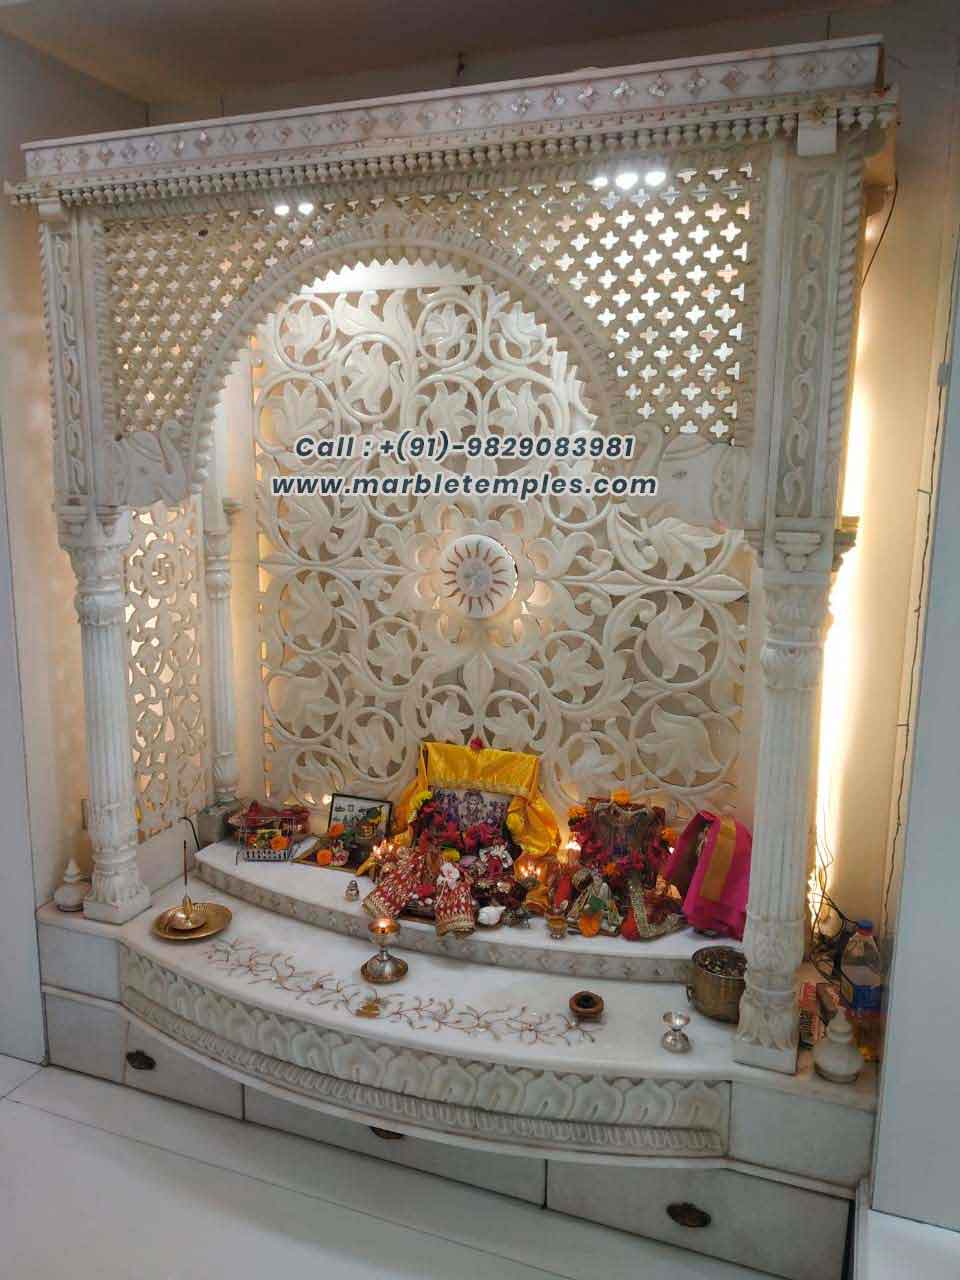 White Marble Hindu Temple Designs for Home Price in Jaipur,India ...